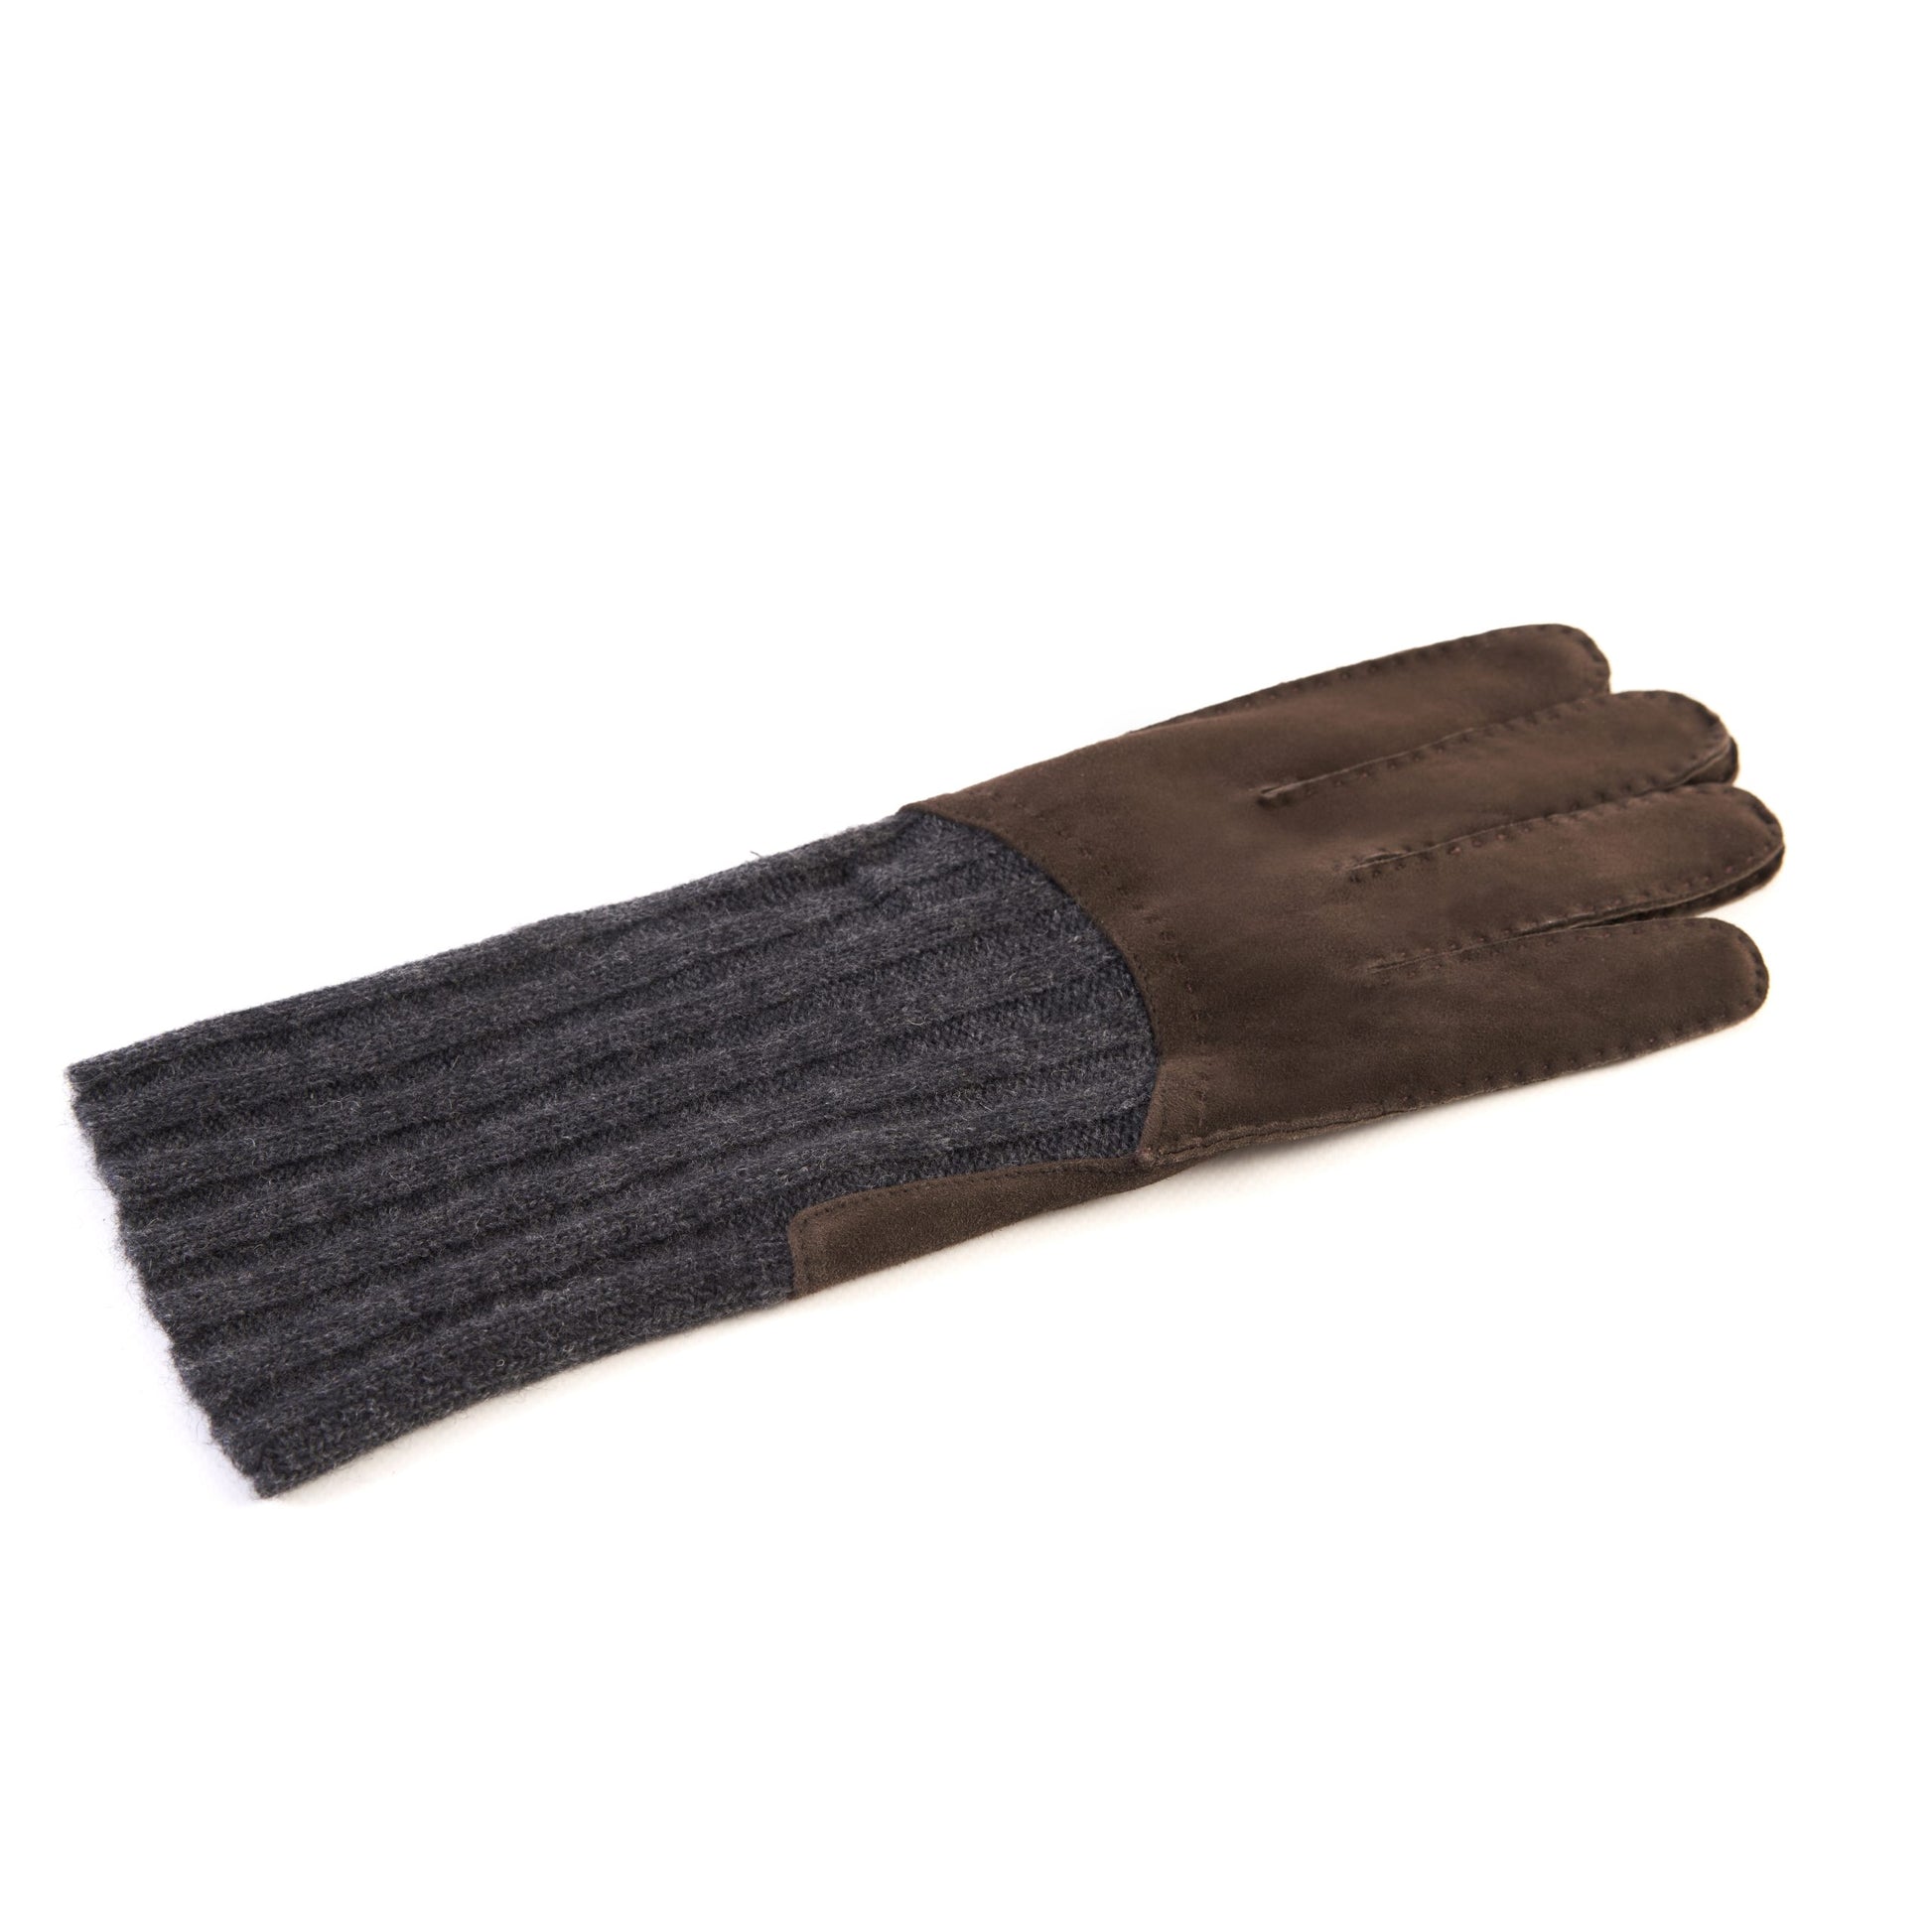 Men's hand-stitched brown suede gloves with grey wool lining with cuff